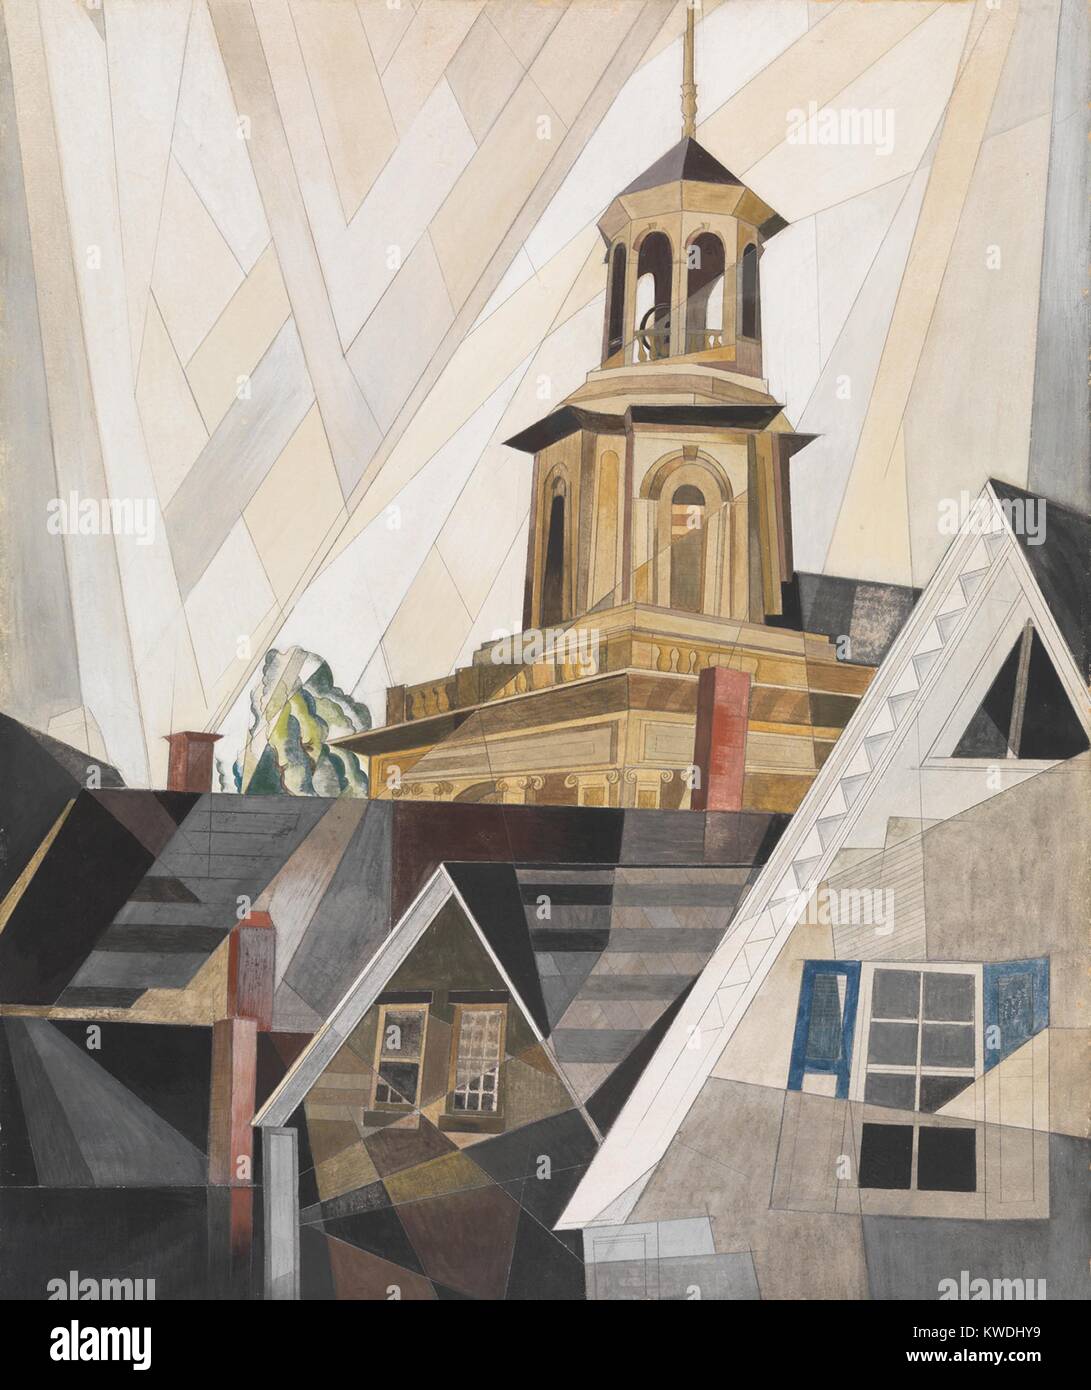 AFTER SIR CHRISTOPHER WREN, by Charles Demuth, 1920, American painting, watercolor, gouache. The old Center Methodist Episcopal Church in Provincetown, Massachusetts, painted with Precisionist ruled lines, geometric forms, and crossing beams of light (BSLOC 2017 7 93) Stock Photo